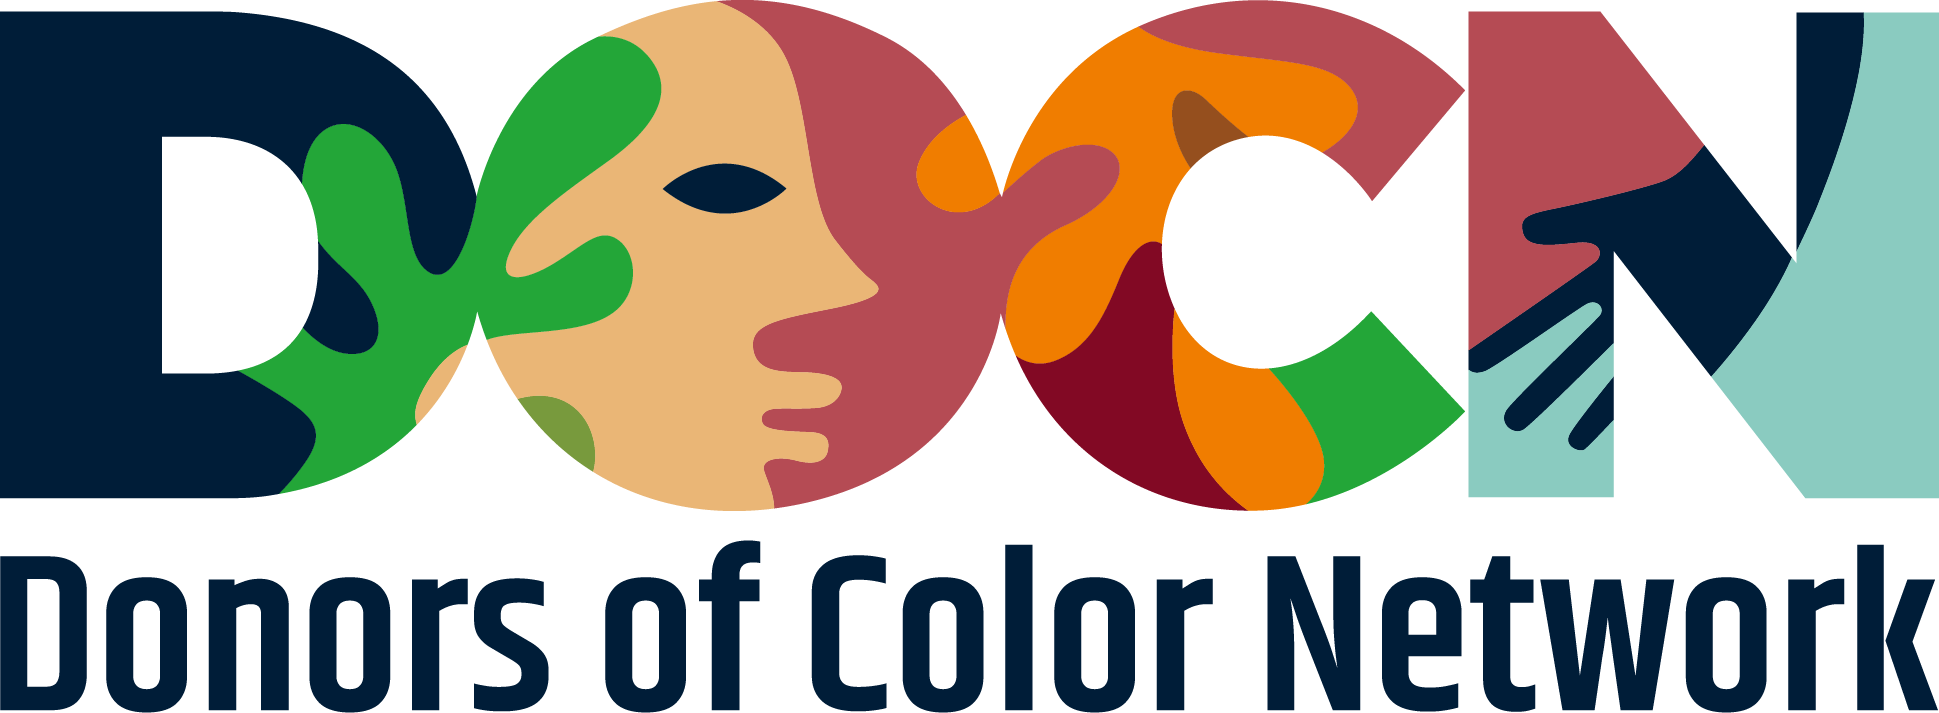 Donors of Color Network logo